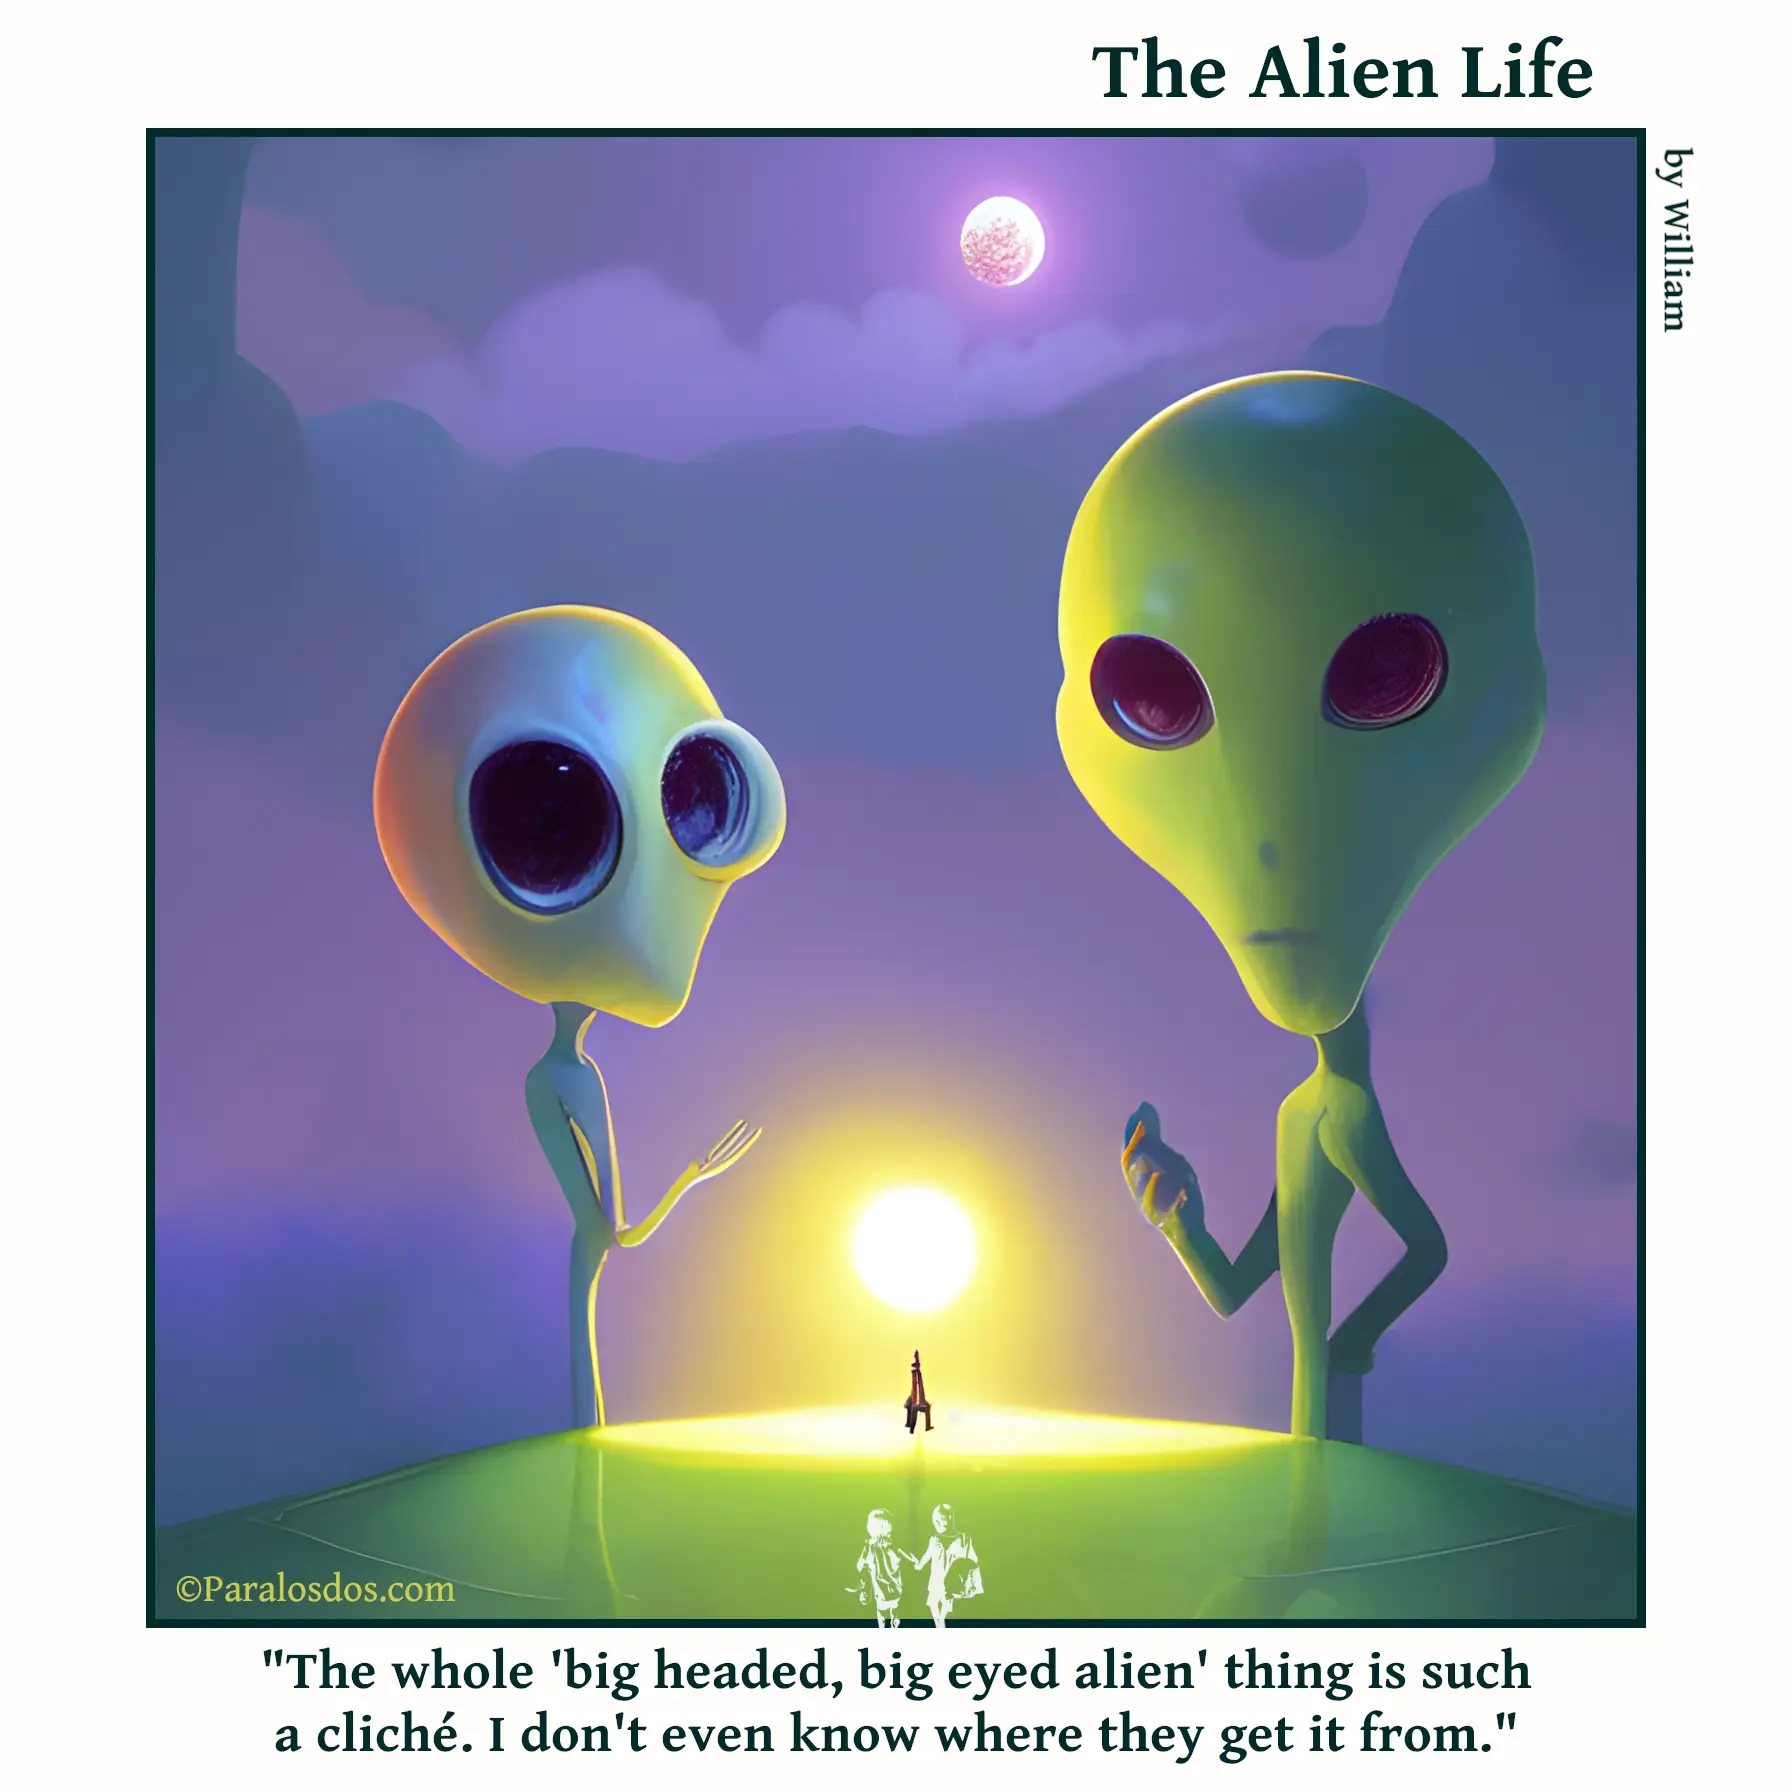 The Alien Life, one panel Comic. Two aliens are at a table talking. They are green with big heads and big eyes. The caption reads: "The whole 'big headed, big eyed alien' thing is such a cliché. I don't even know where they get it from."